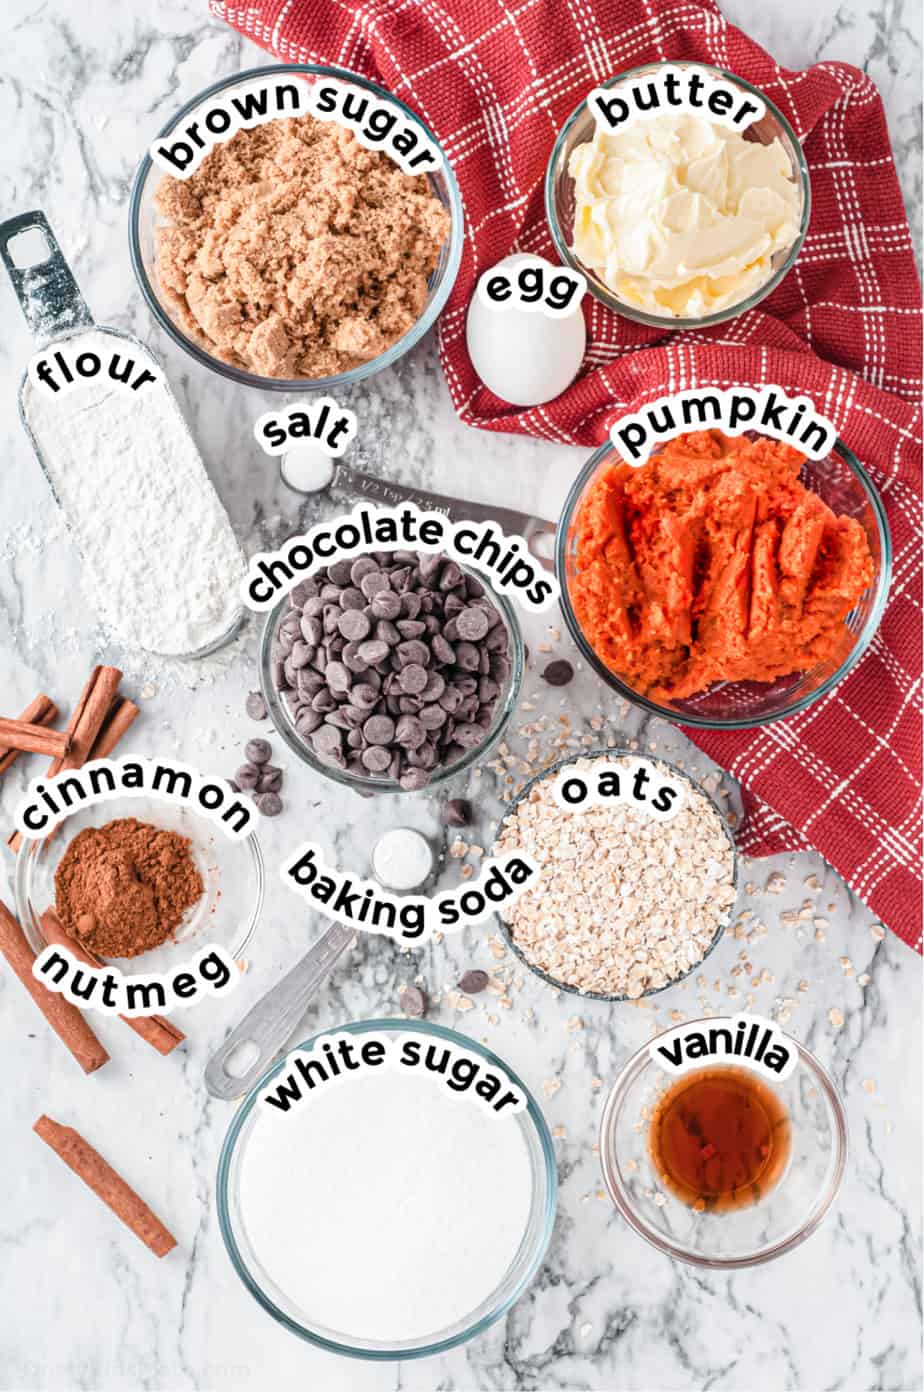 Ingredients for pumpkin oatmeal cookies with chocolate chips